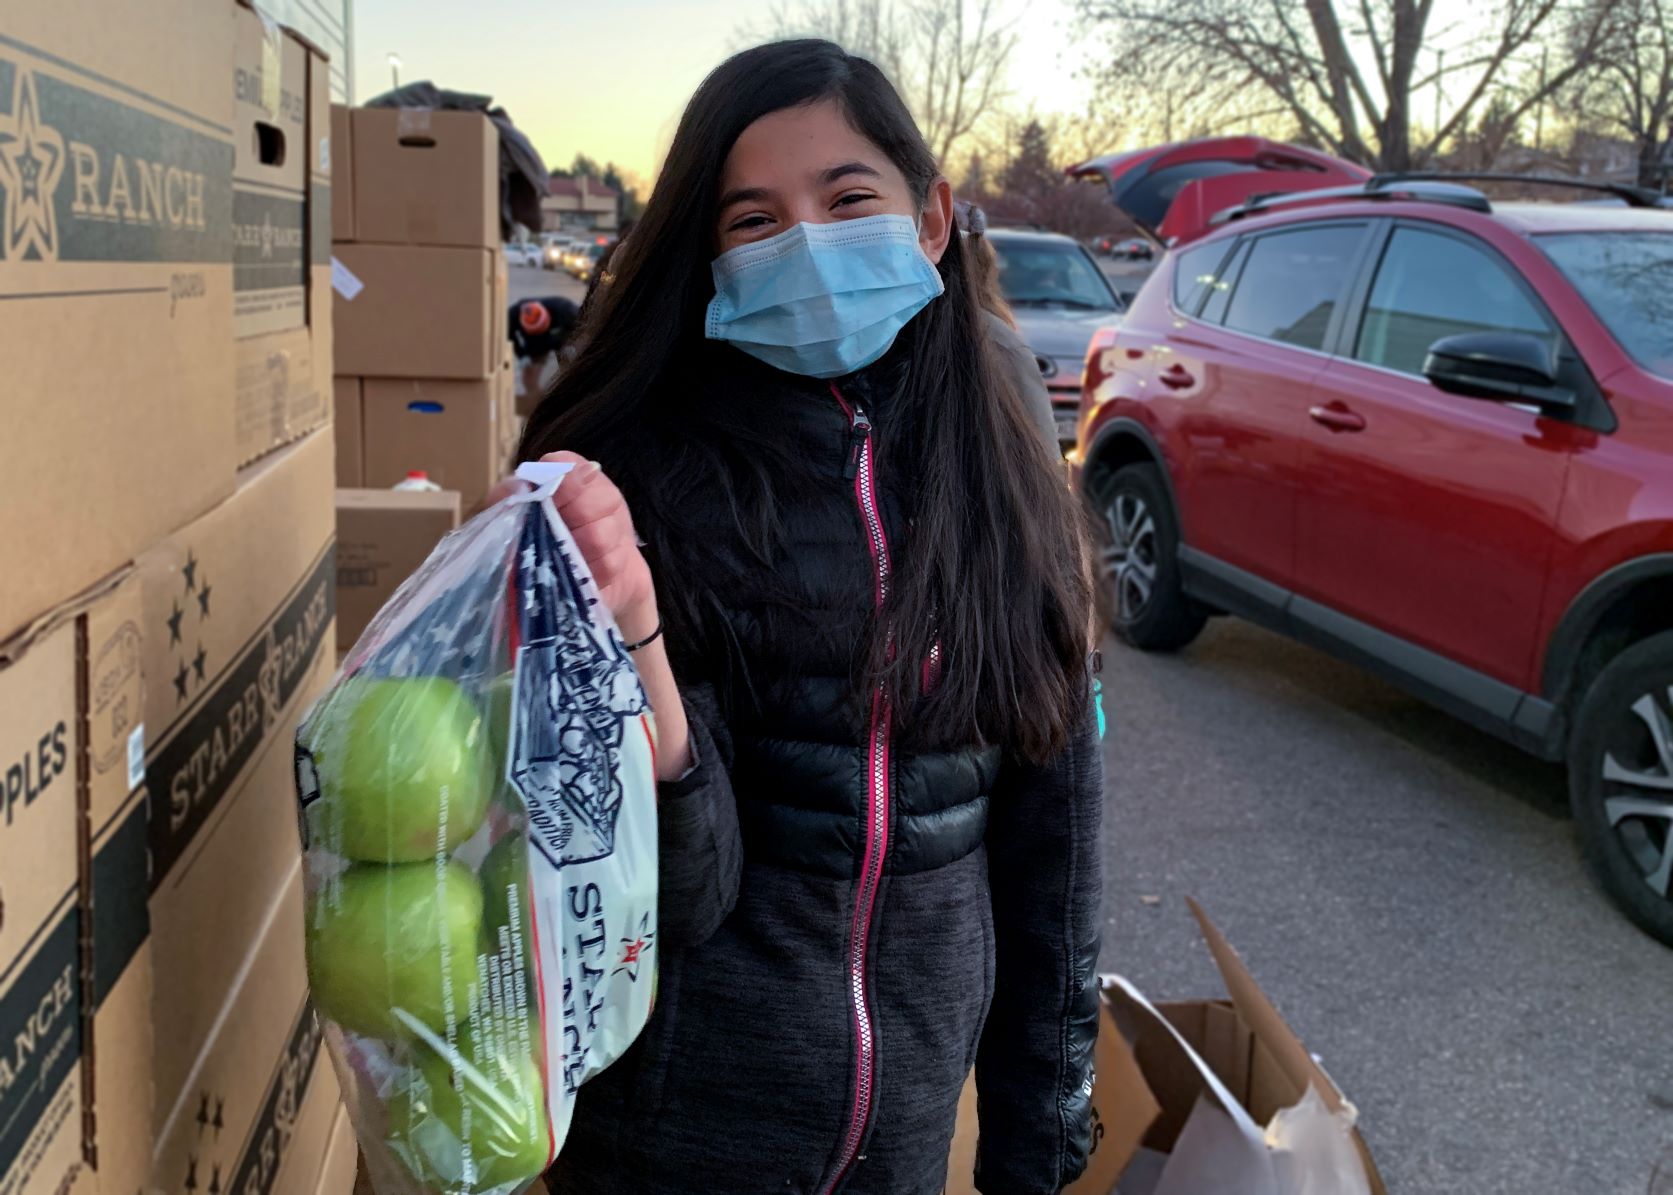 A young girl wearing a mask holding a bag of apples.